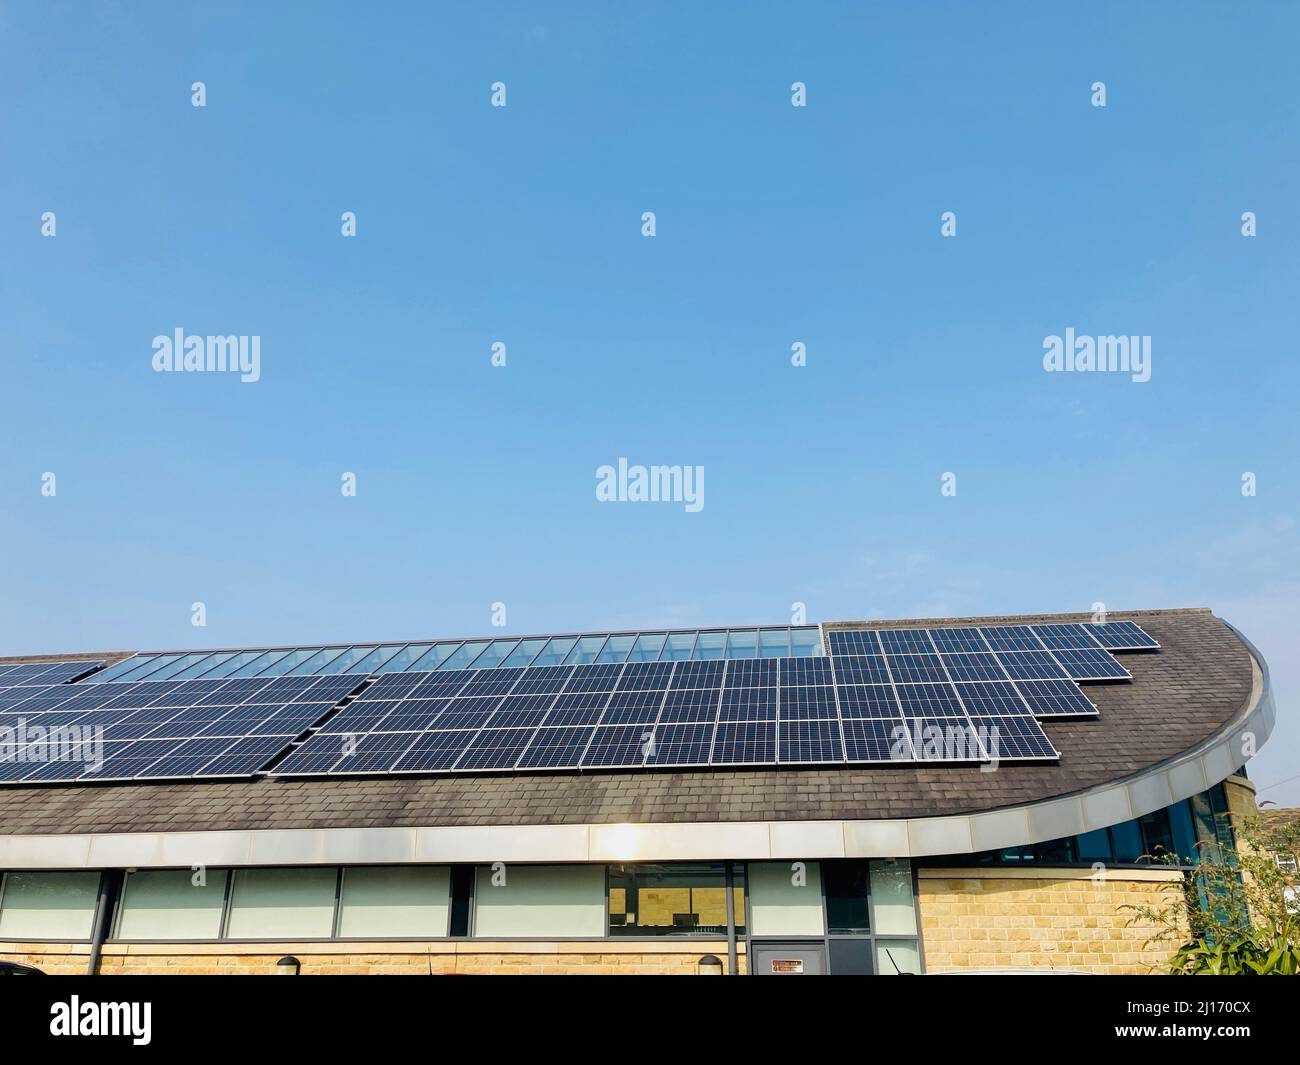 Solar power panels for the production of solar electricity energy on the roof of a public library building in Otley, UK. Stock Photo